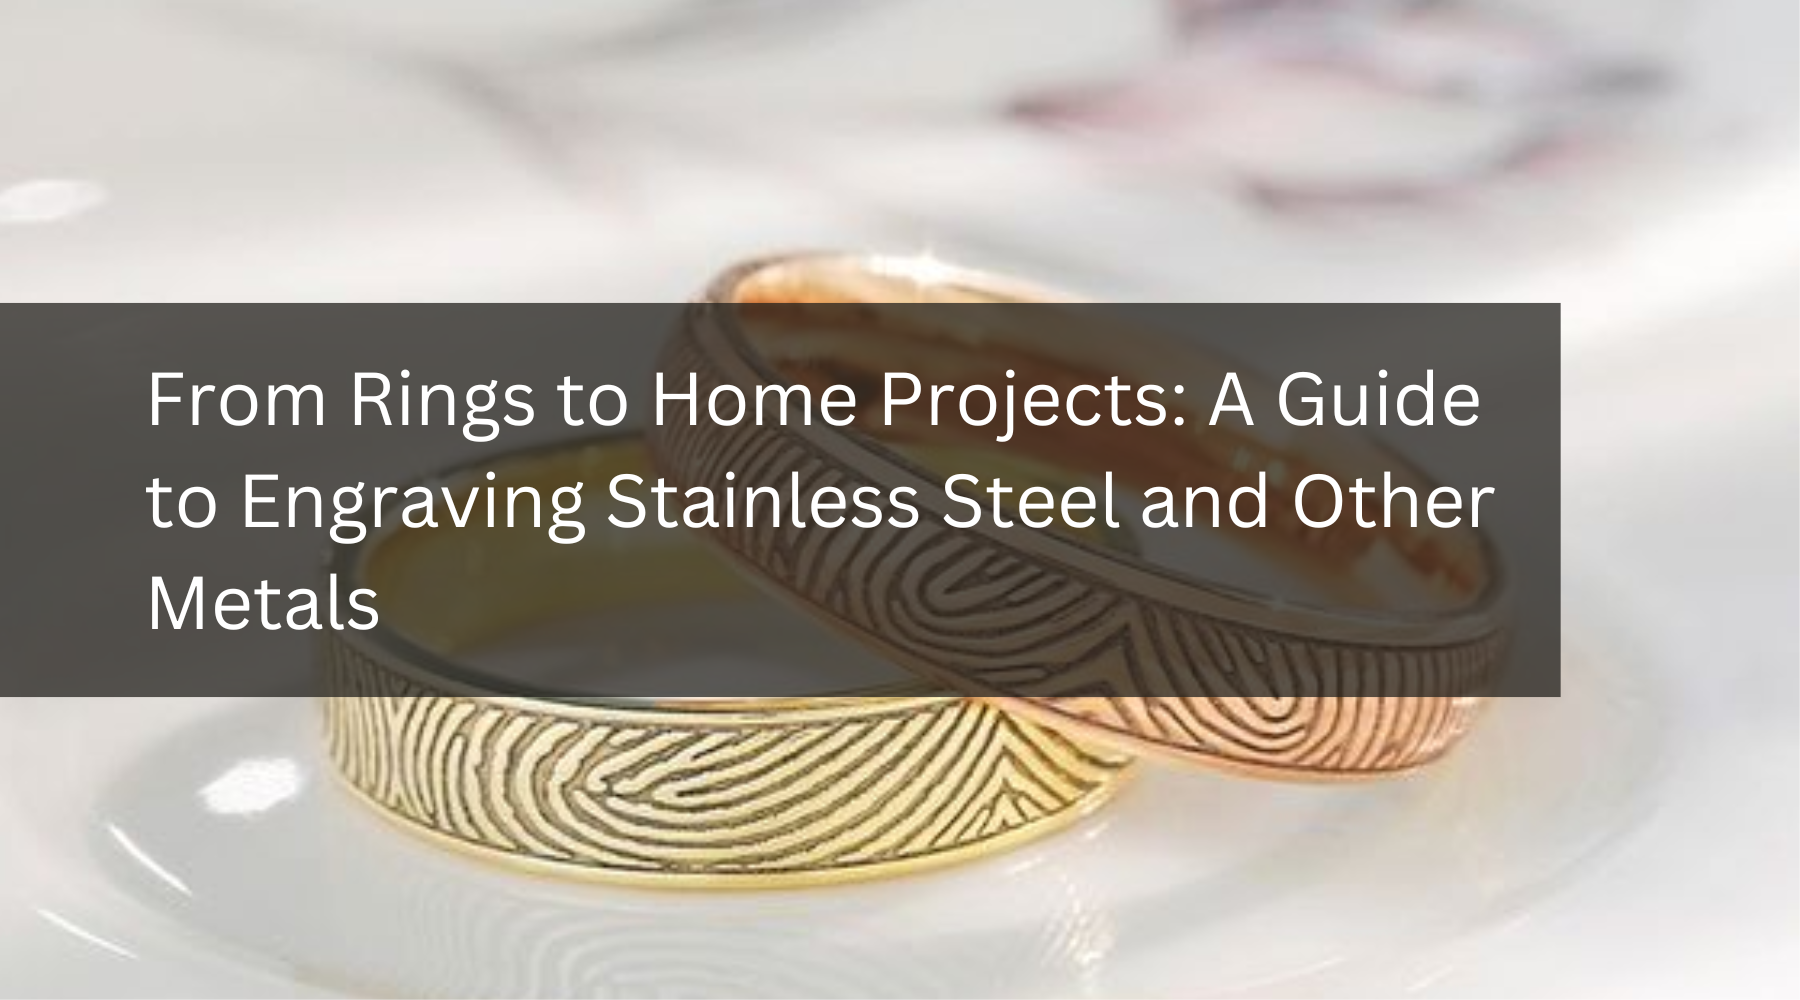 From Rings to Home Projects: A Guide to Engraving Stainless Steel and Other Metals